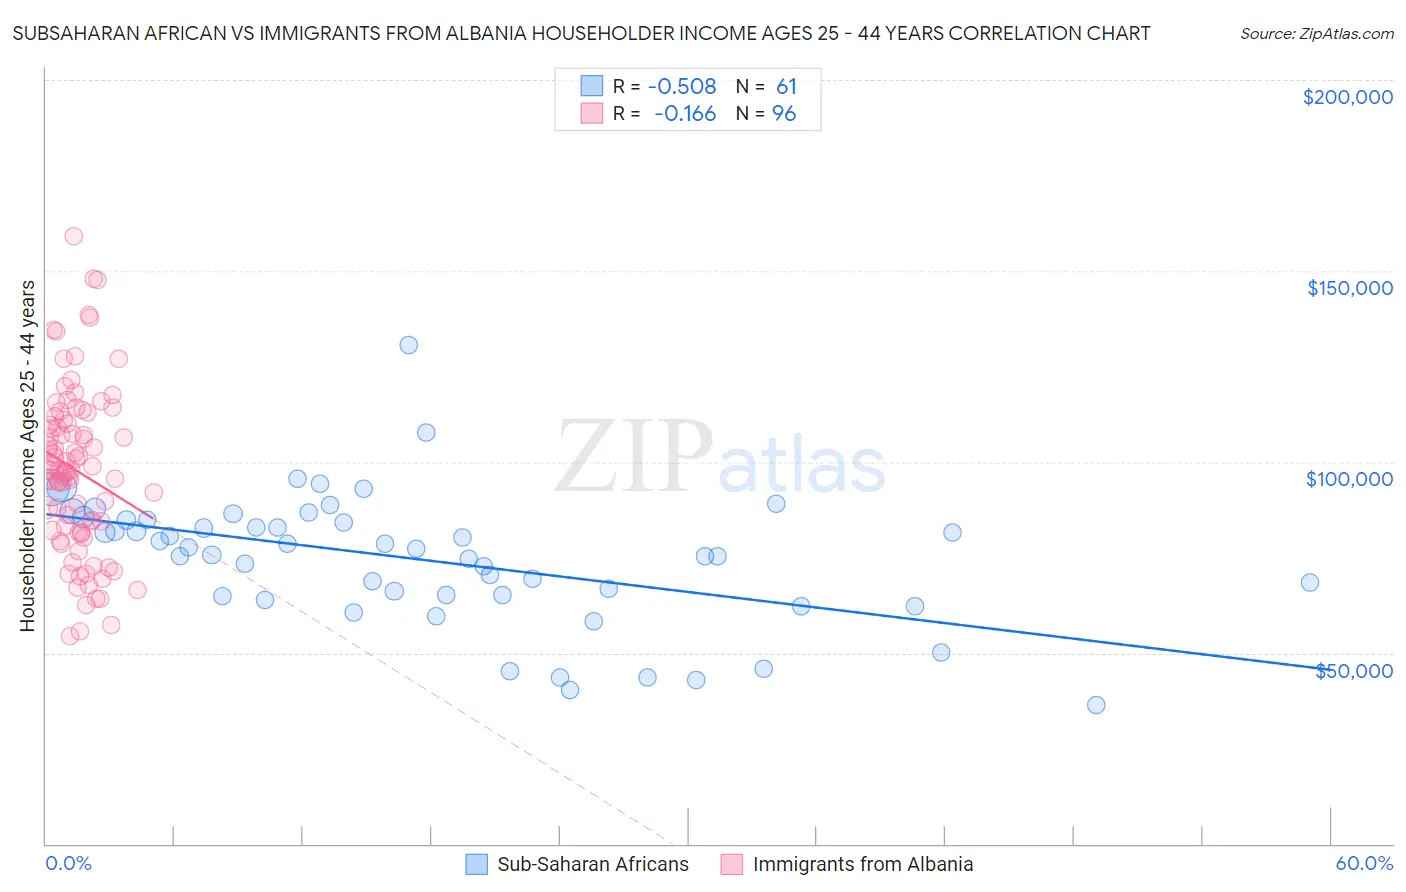 Subsaharan African vs Immigrants from Albania Householder Income Ages 25 - 44 years